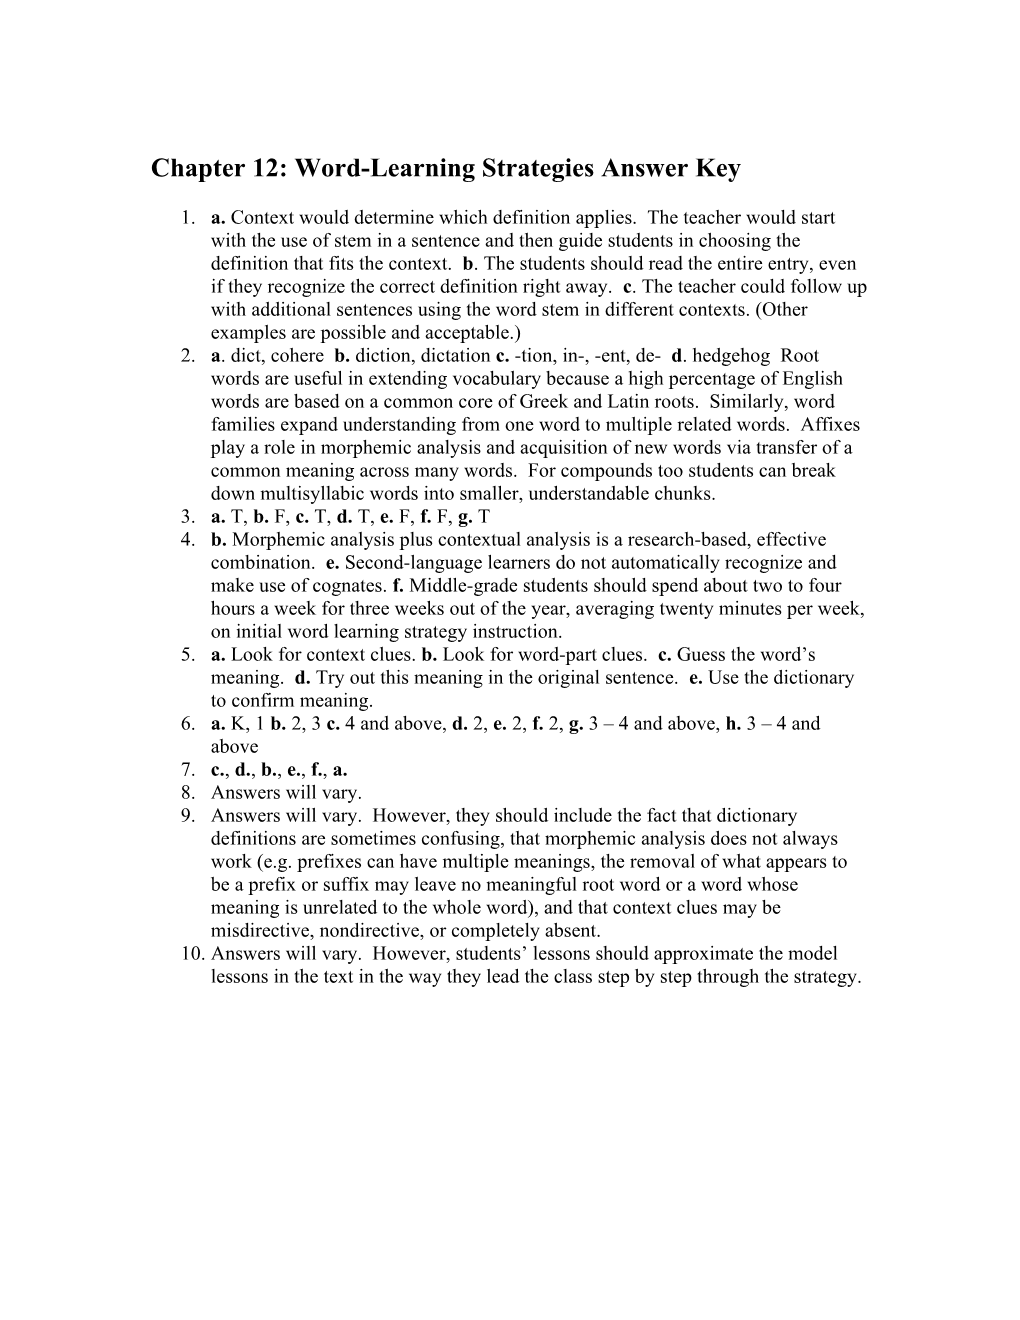 Chapter 12: Word-Learning Strategies Answer Key